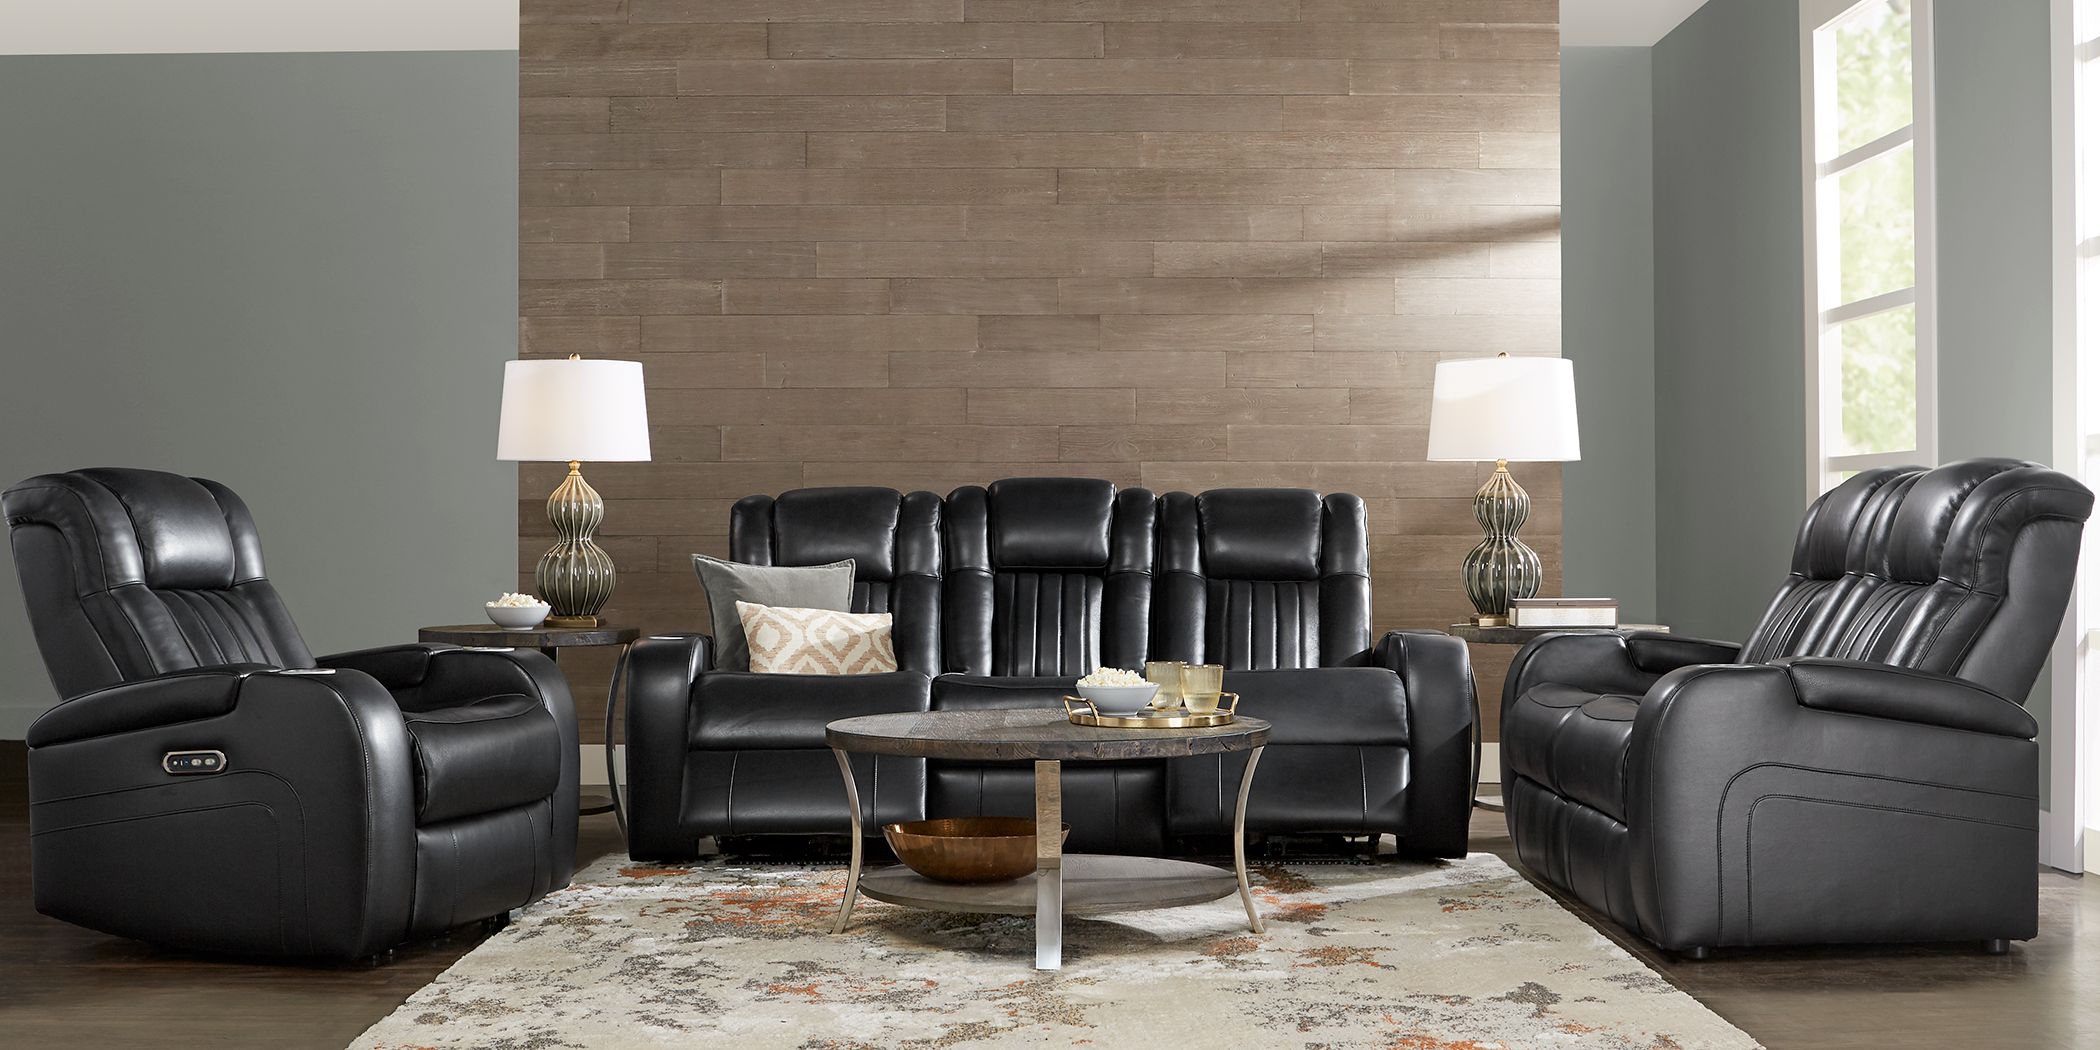 Classic double reclining loveseat bonded leather living room recliner black Black Leather Sofas Couches